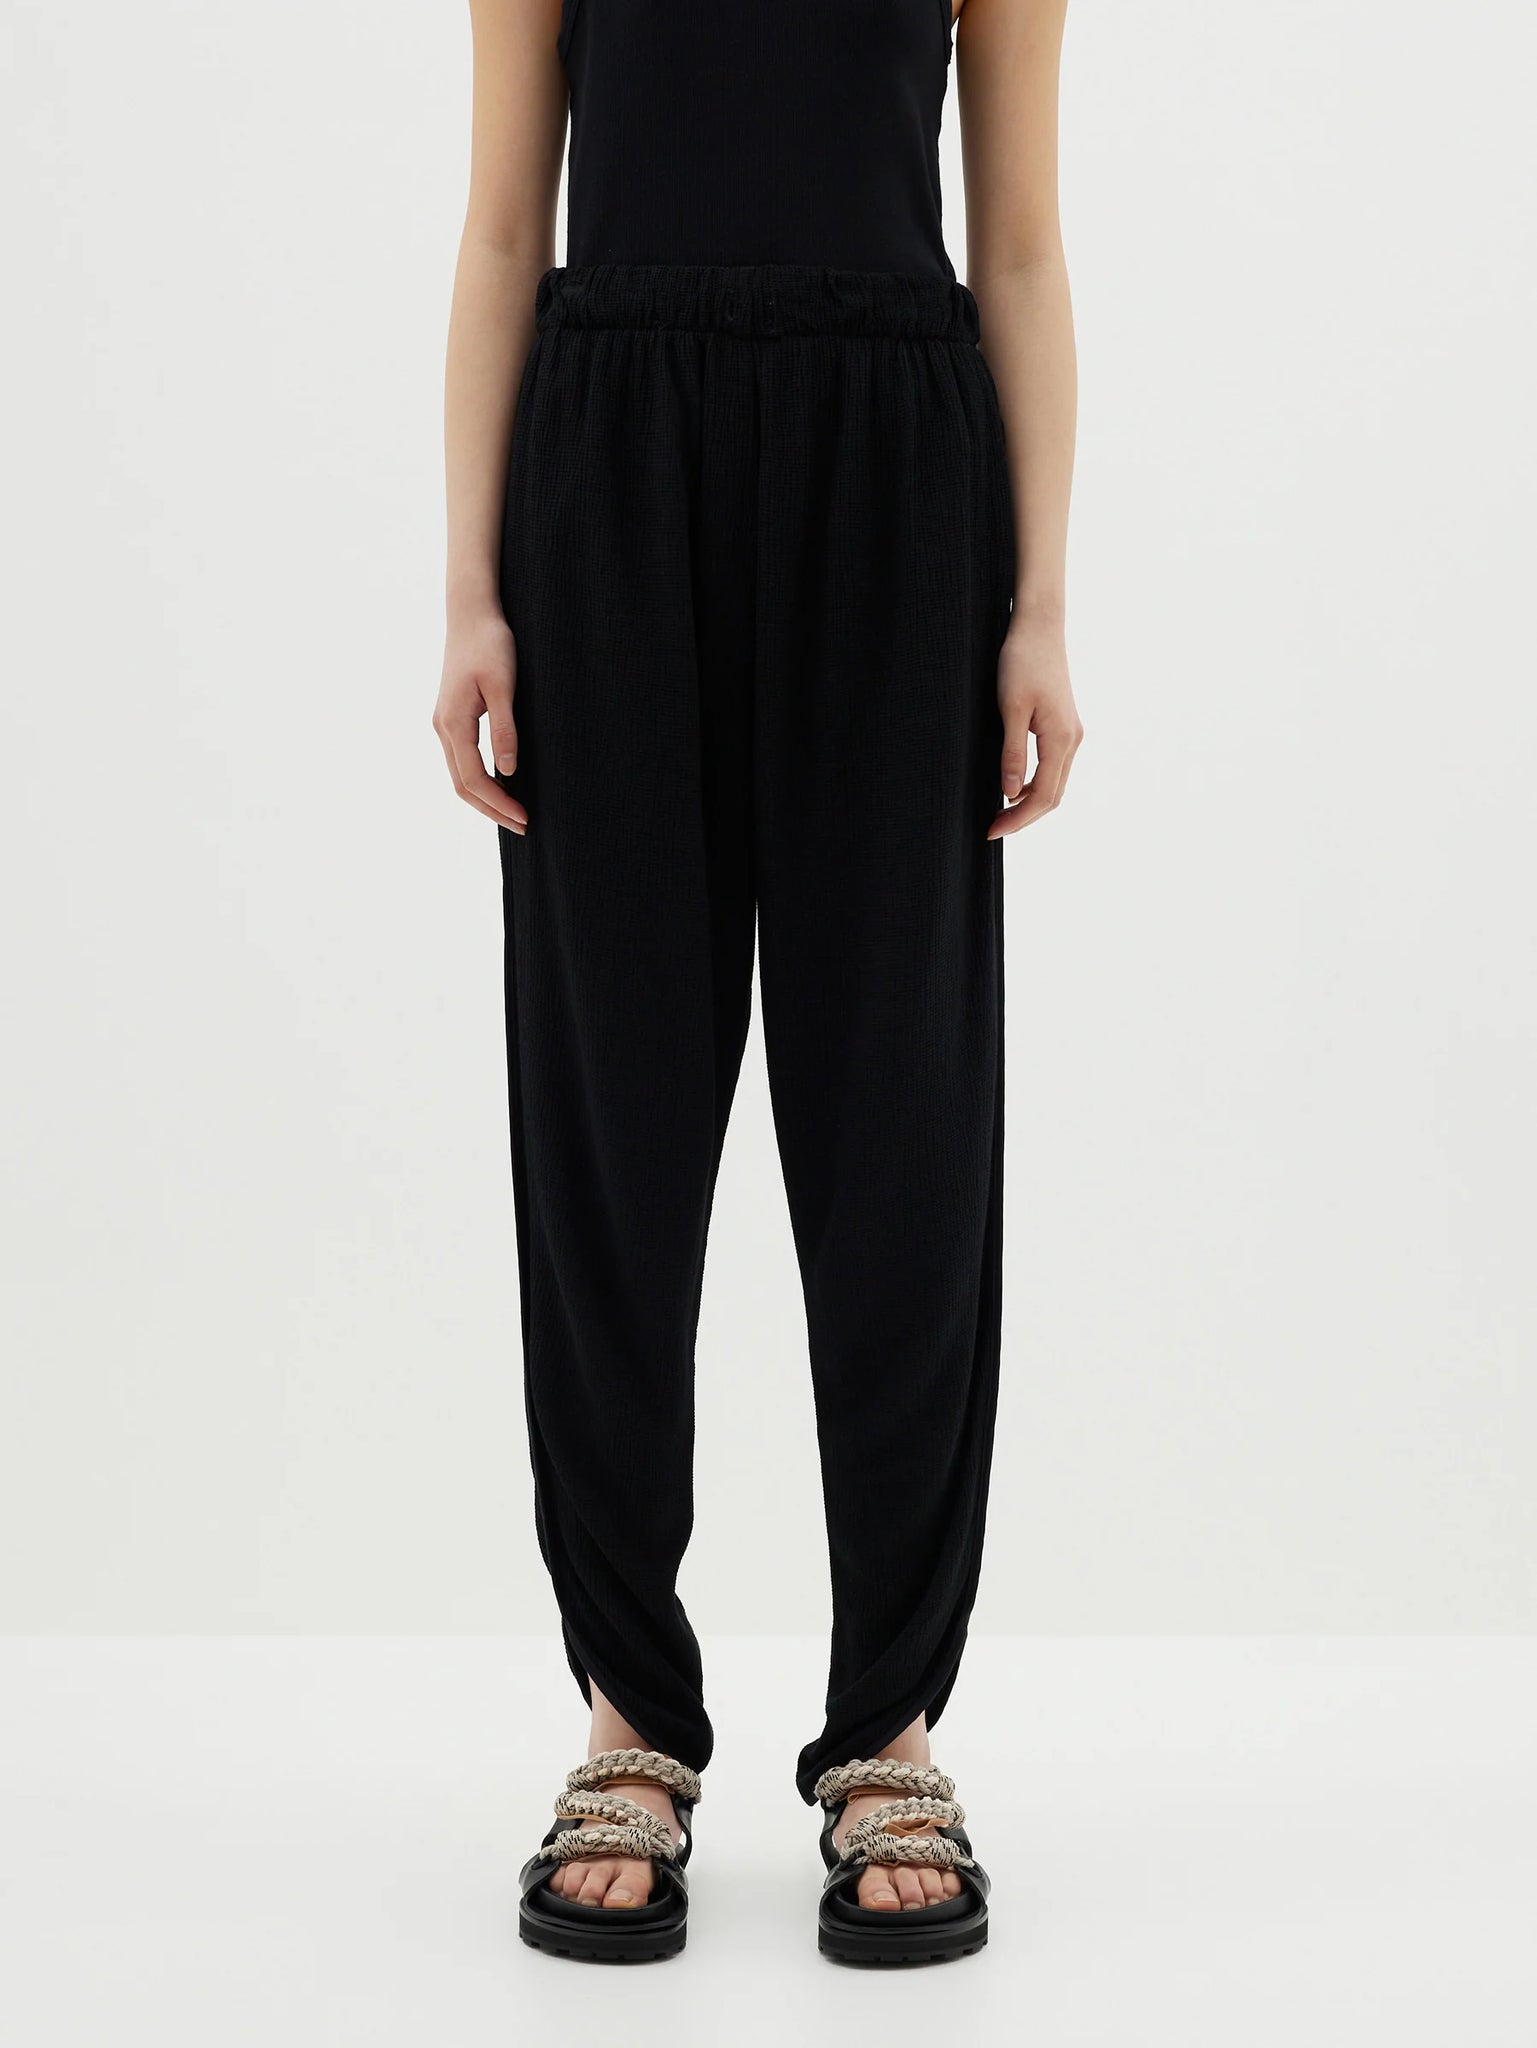 Textured crepe pull on pant